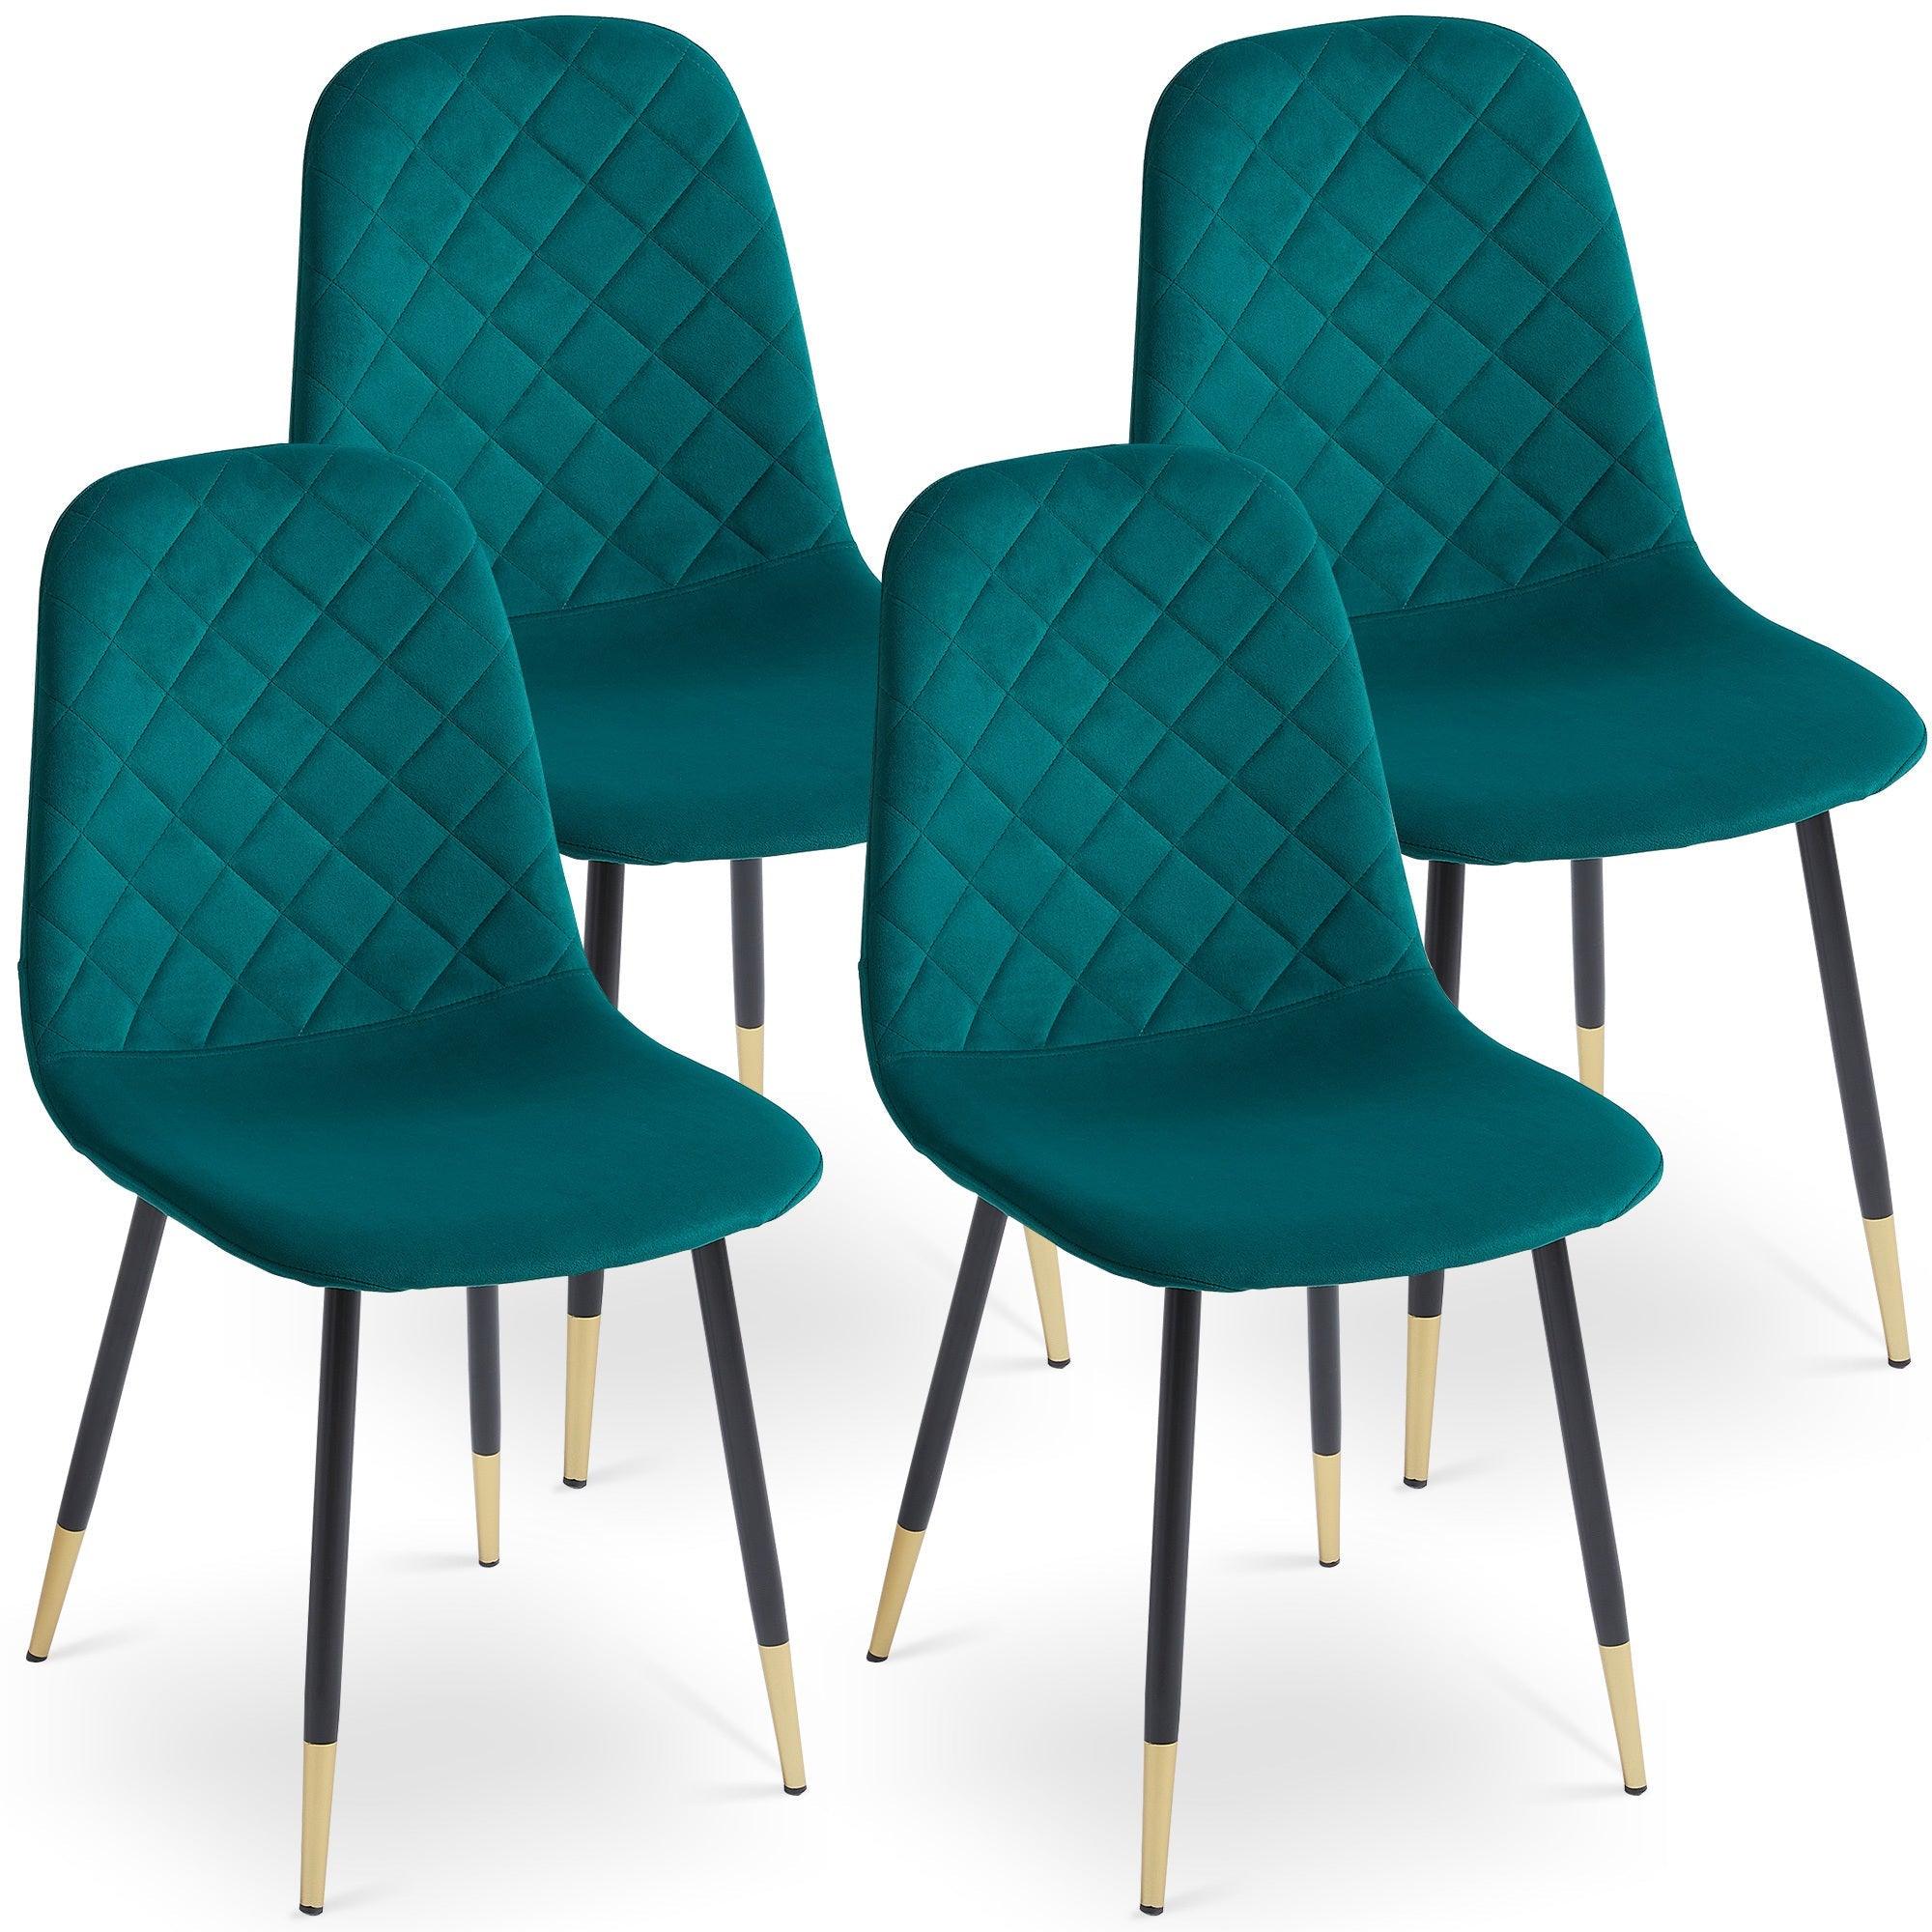 Dark Green Velvet Tufted Accent Chairs with Golden Color Metal Legs, Modern Dining Chairs for Living Room, Set of 4 LamCham